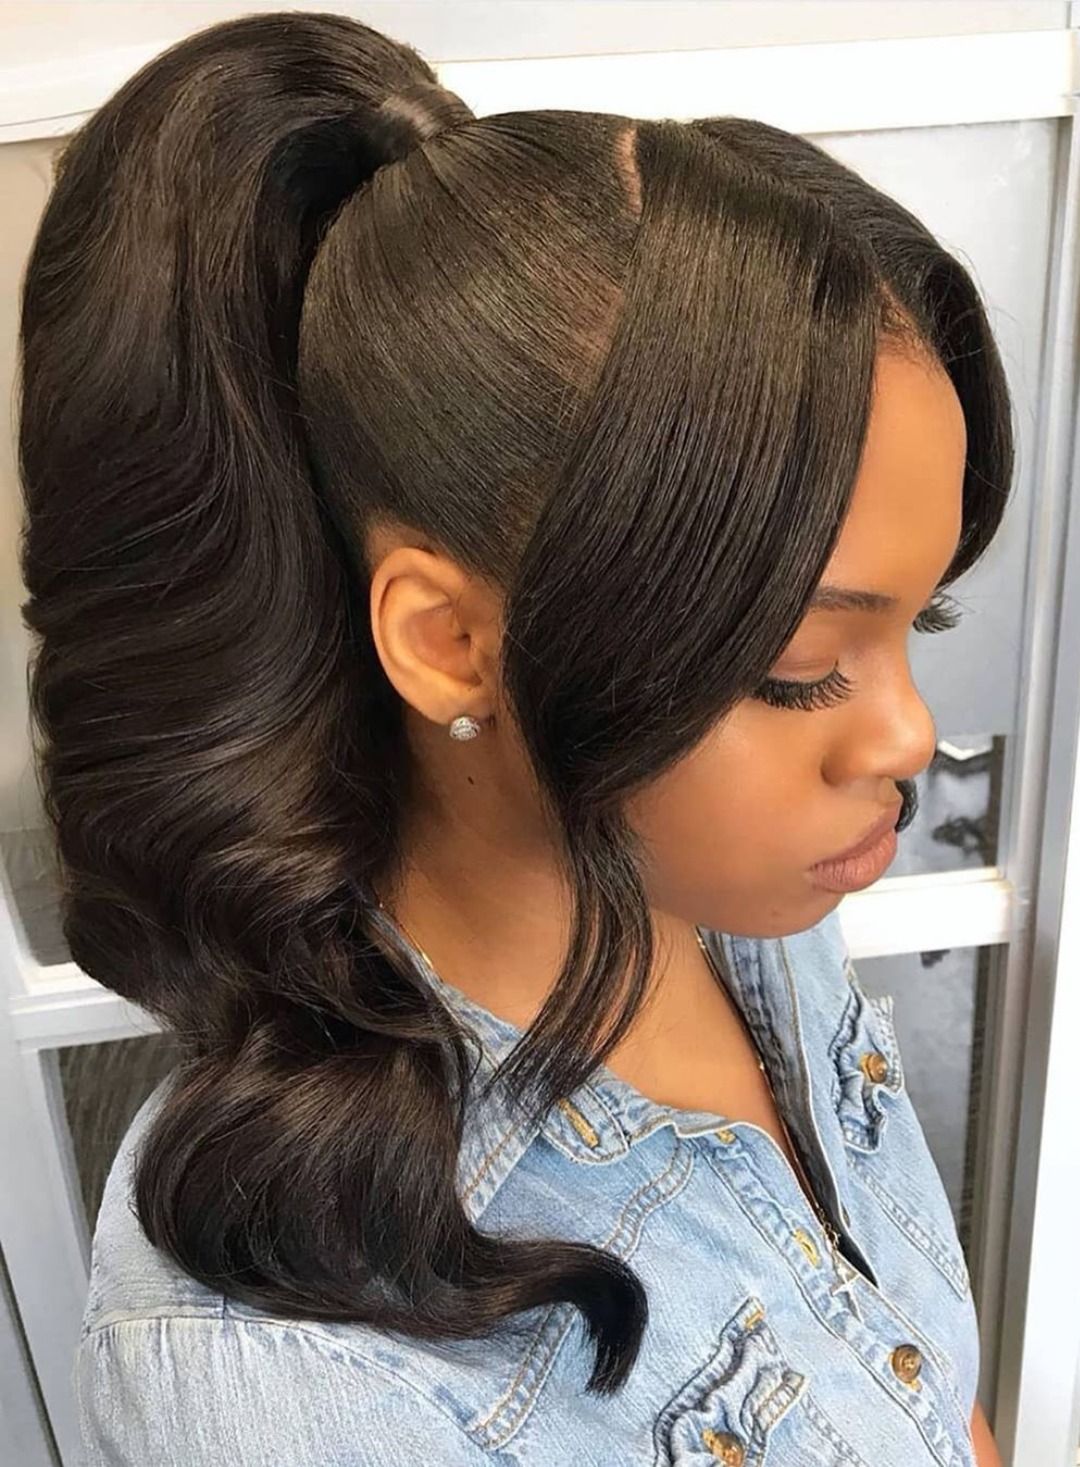 Gorgeous high ponytail 🔥😍who wanna rock it?🤗